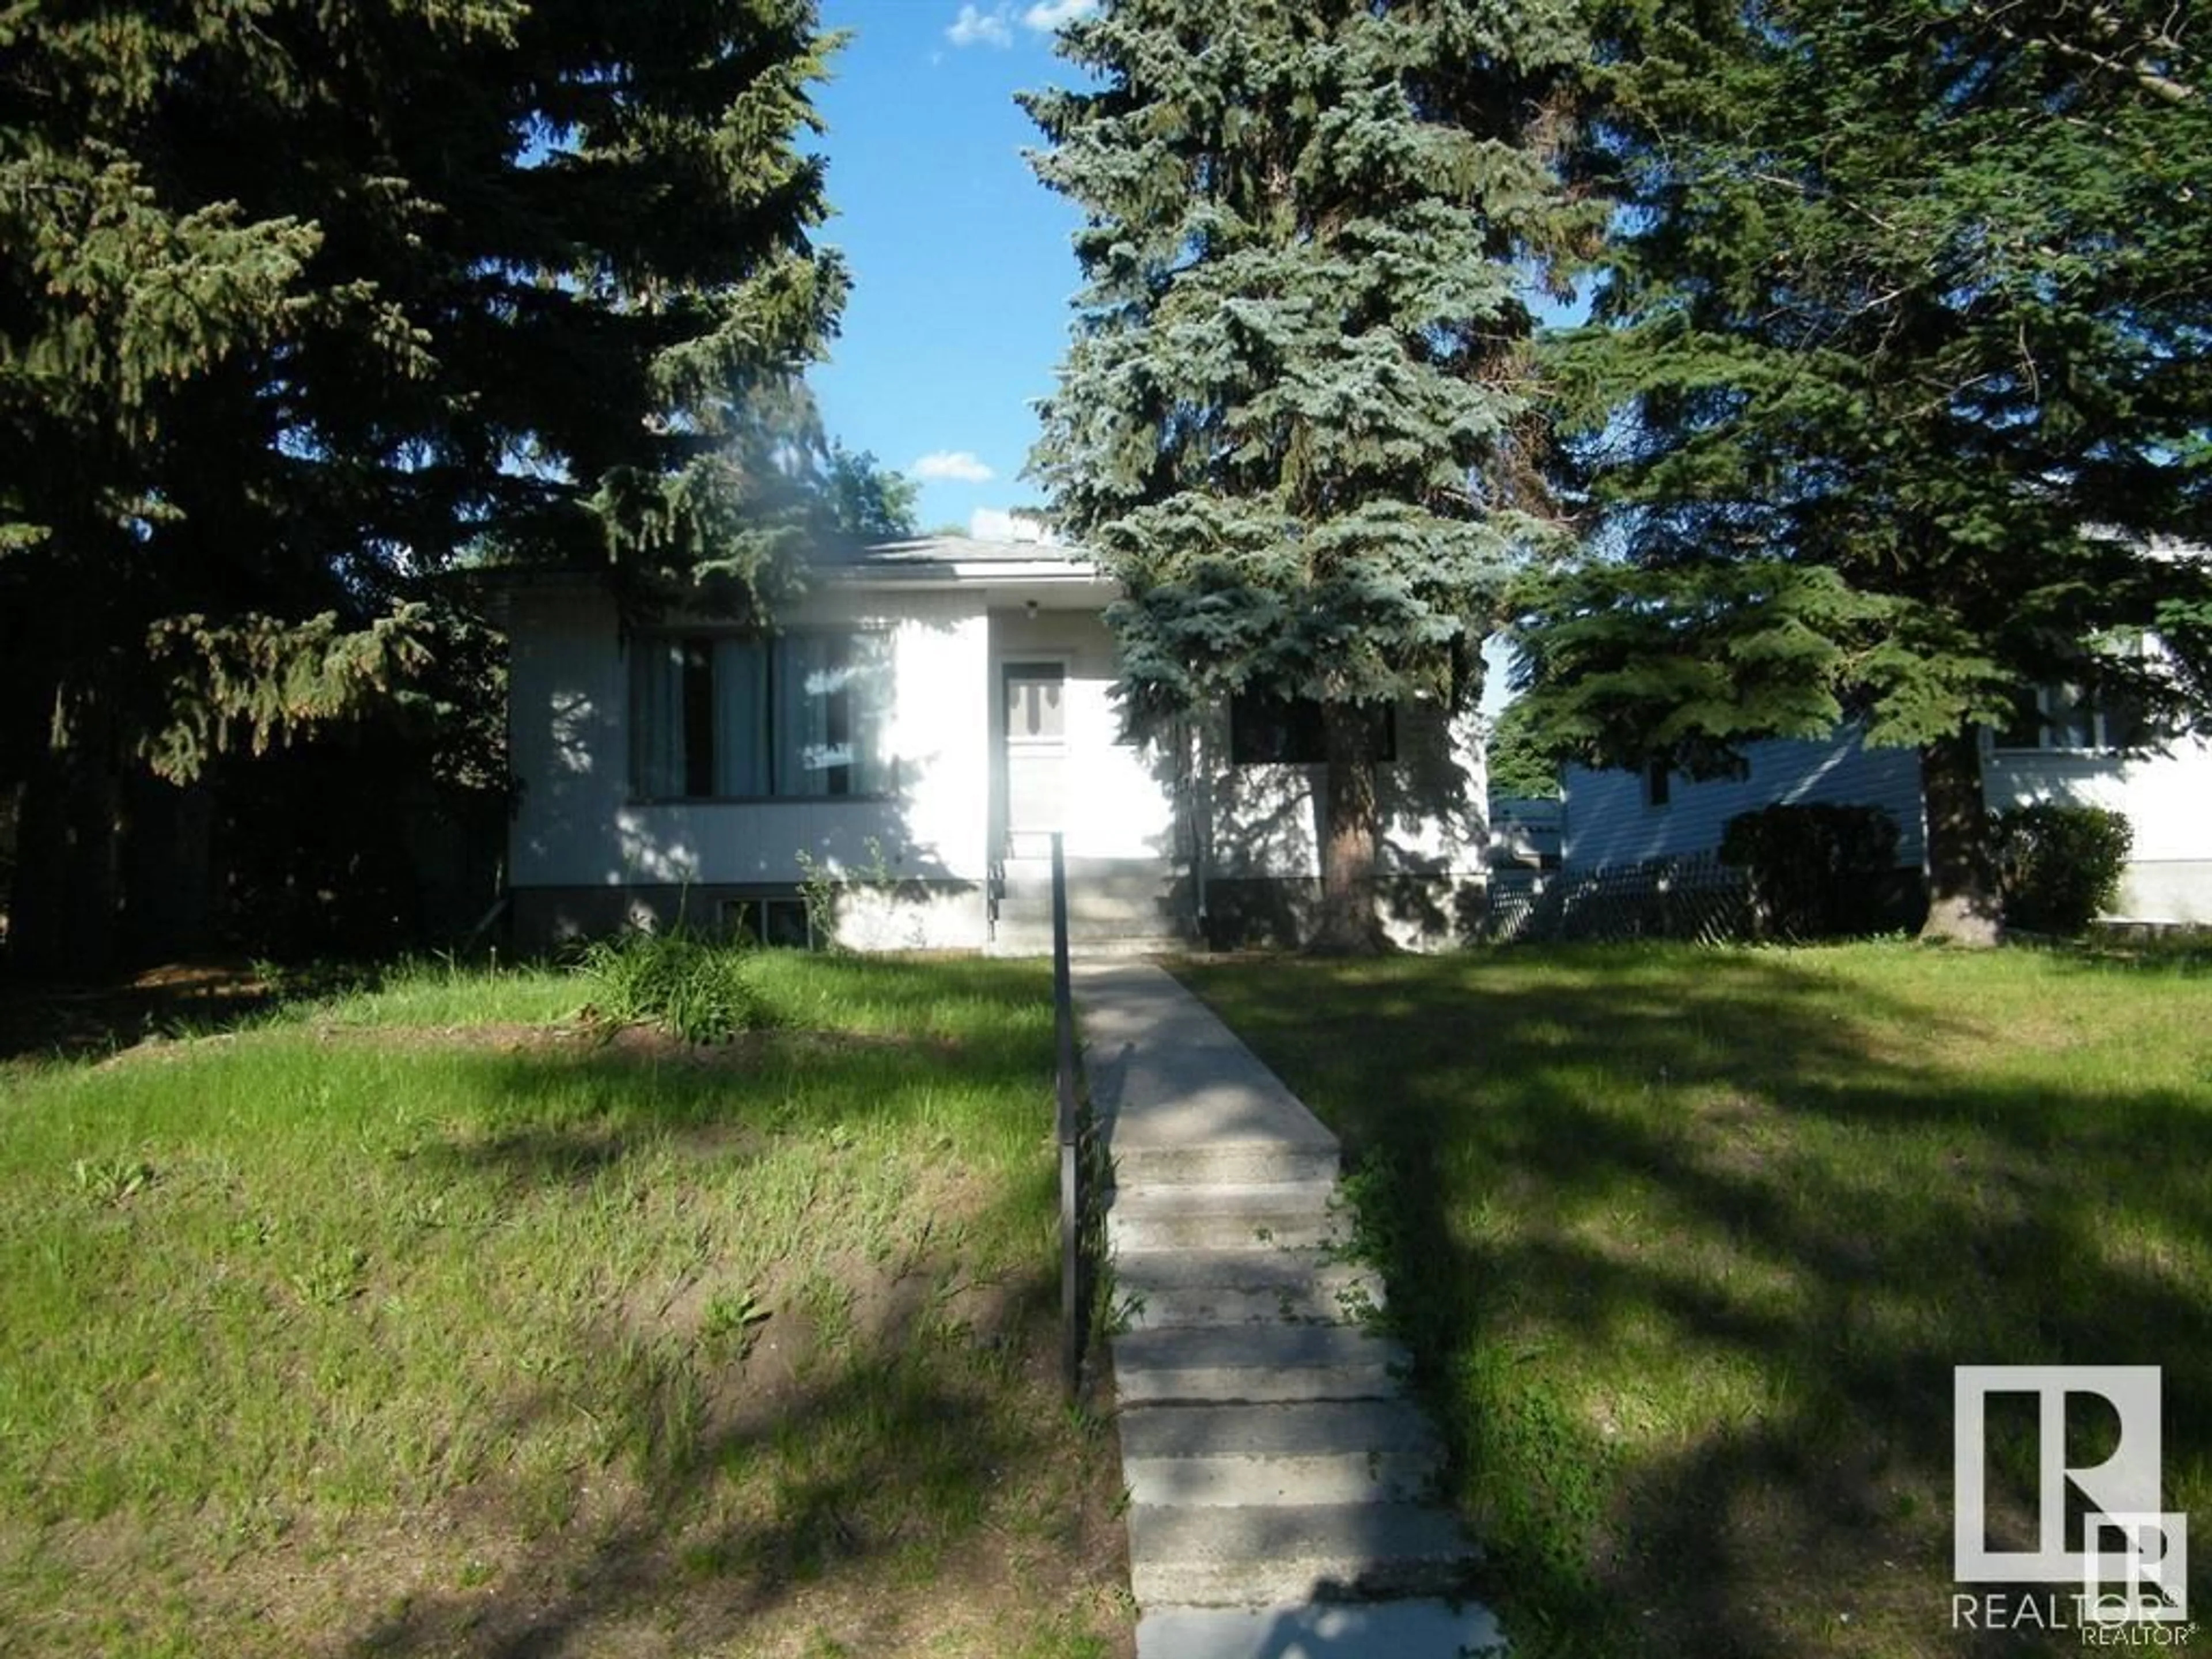 Outside view for 9543 87 ST NW, Edmonton Alberta T6C3W9